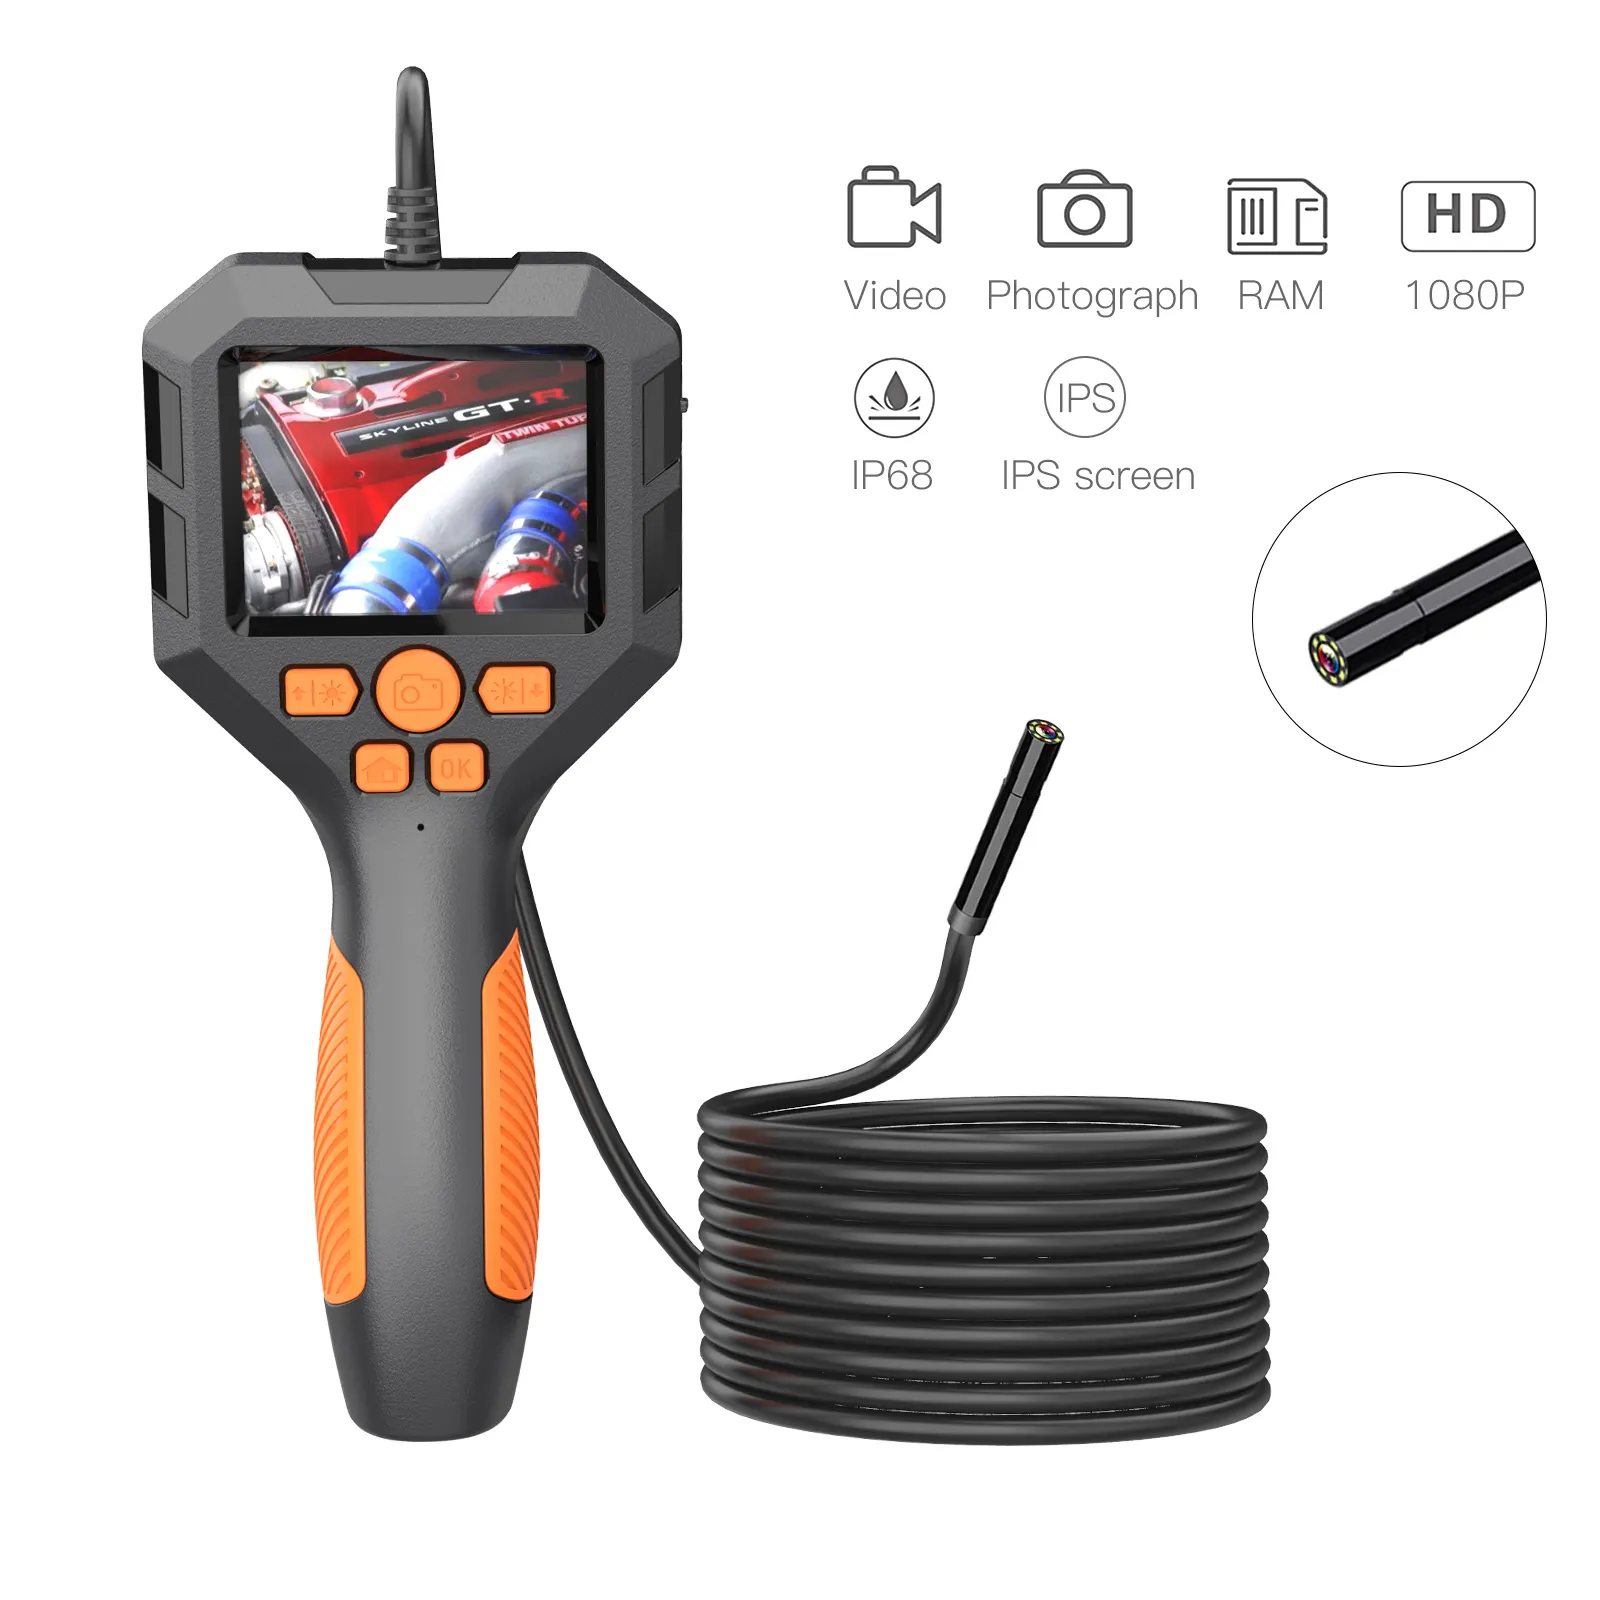 1080P HD Handheld Inspection camera 2.8 inch screen Borescope 8mm lens Hand grip endoscope camera with 5meters cable